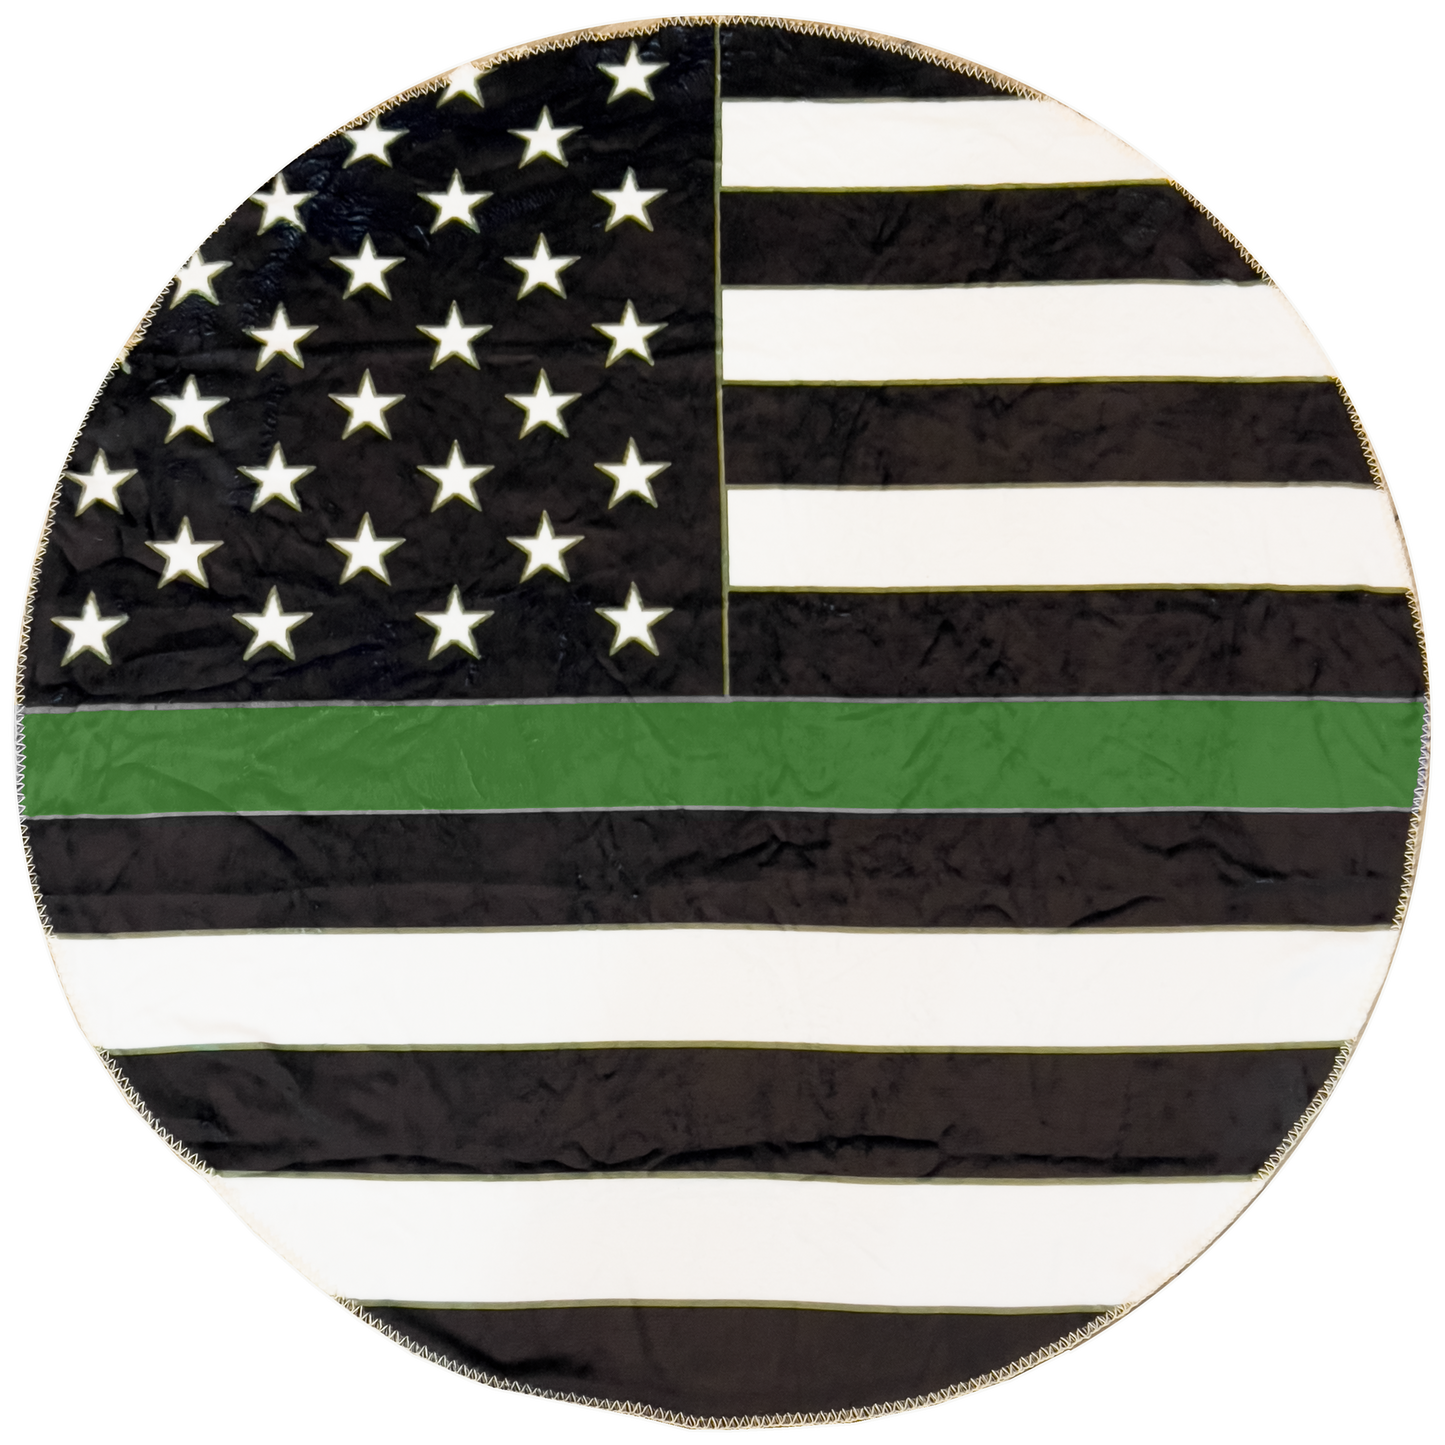 Official America's Front Line Thin Green Line Border Patrol Round Blanket Bedding Sofa Couch Throw